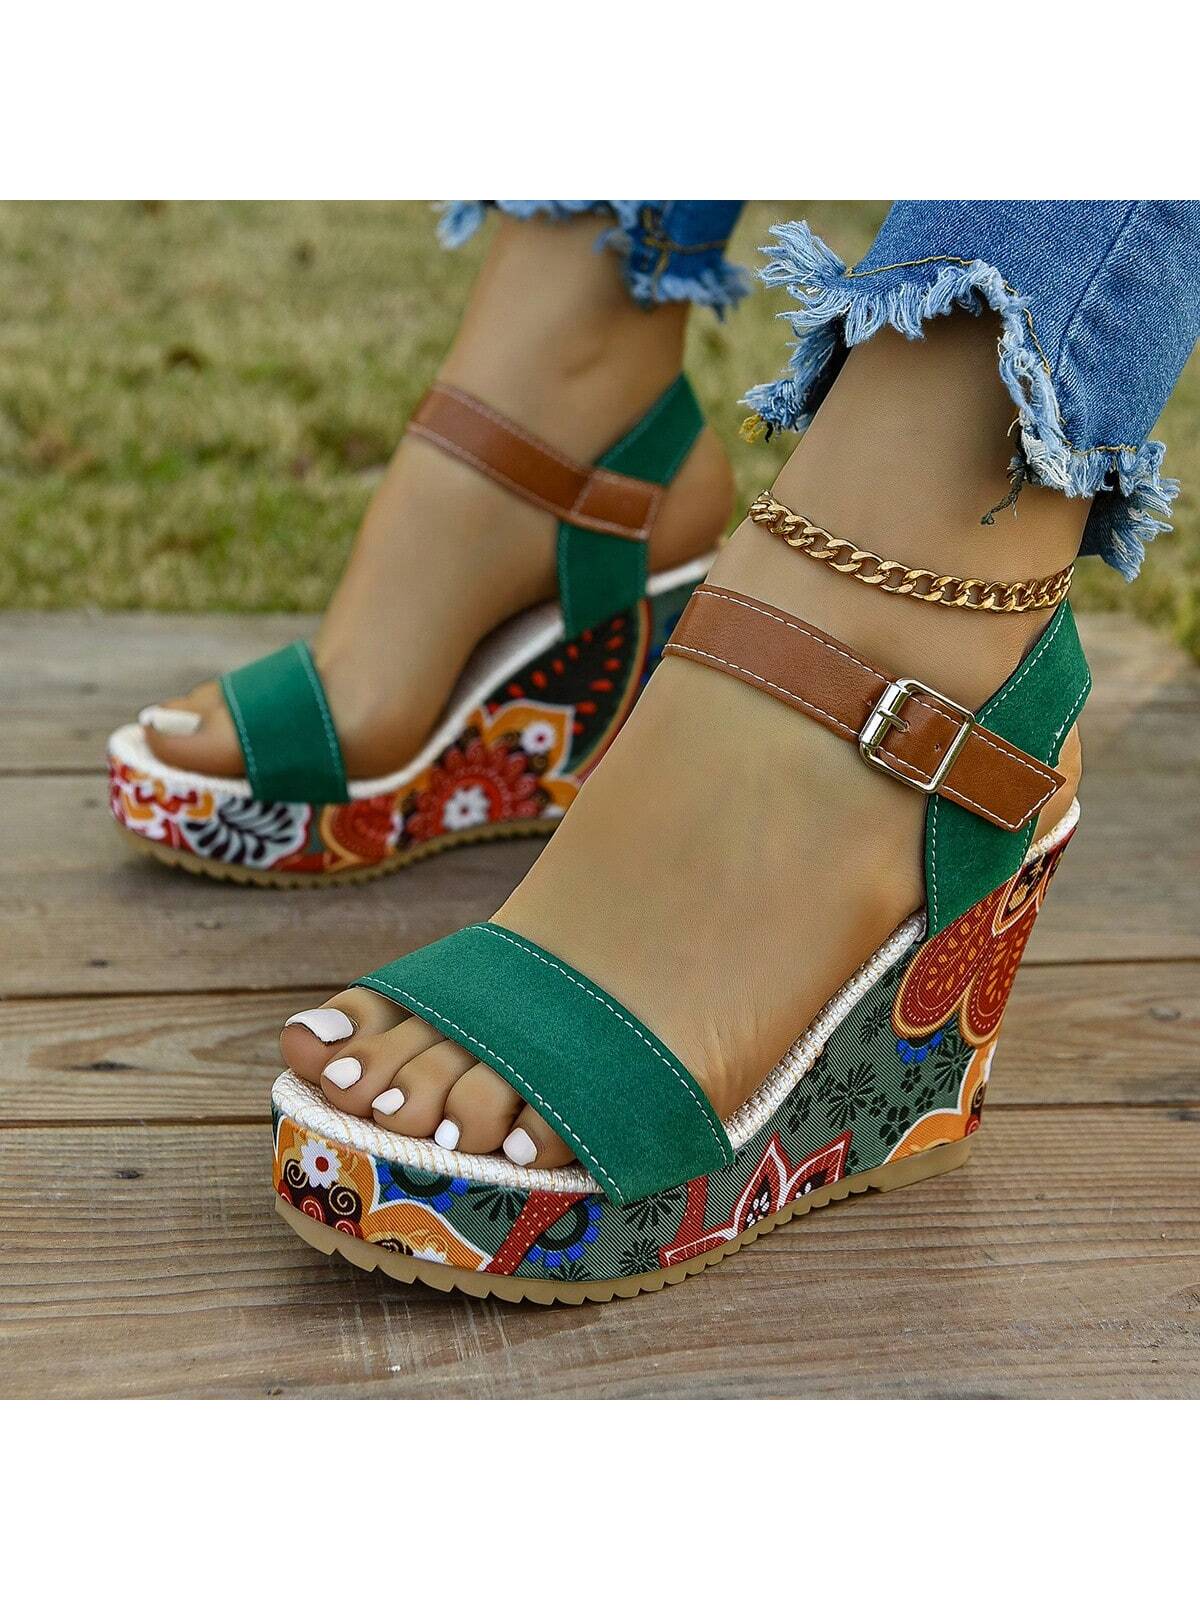 New Arrival Style Canvas High Heeled Wedge Sole Sandals